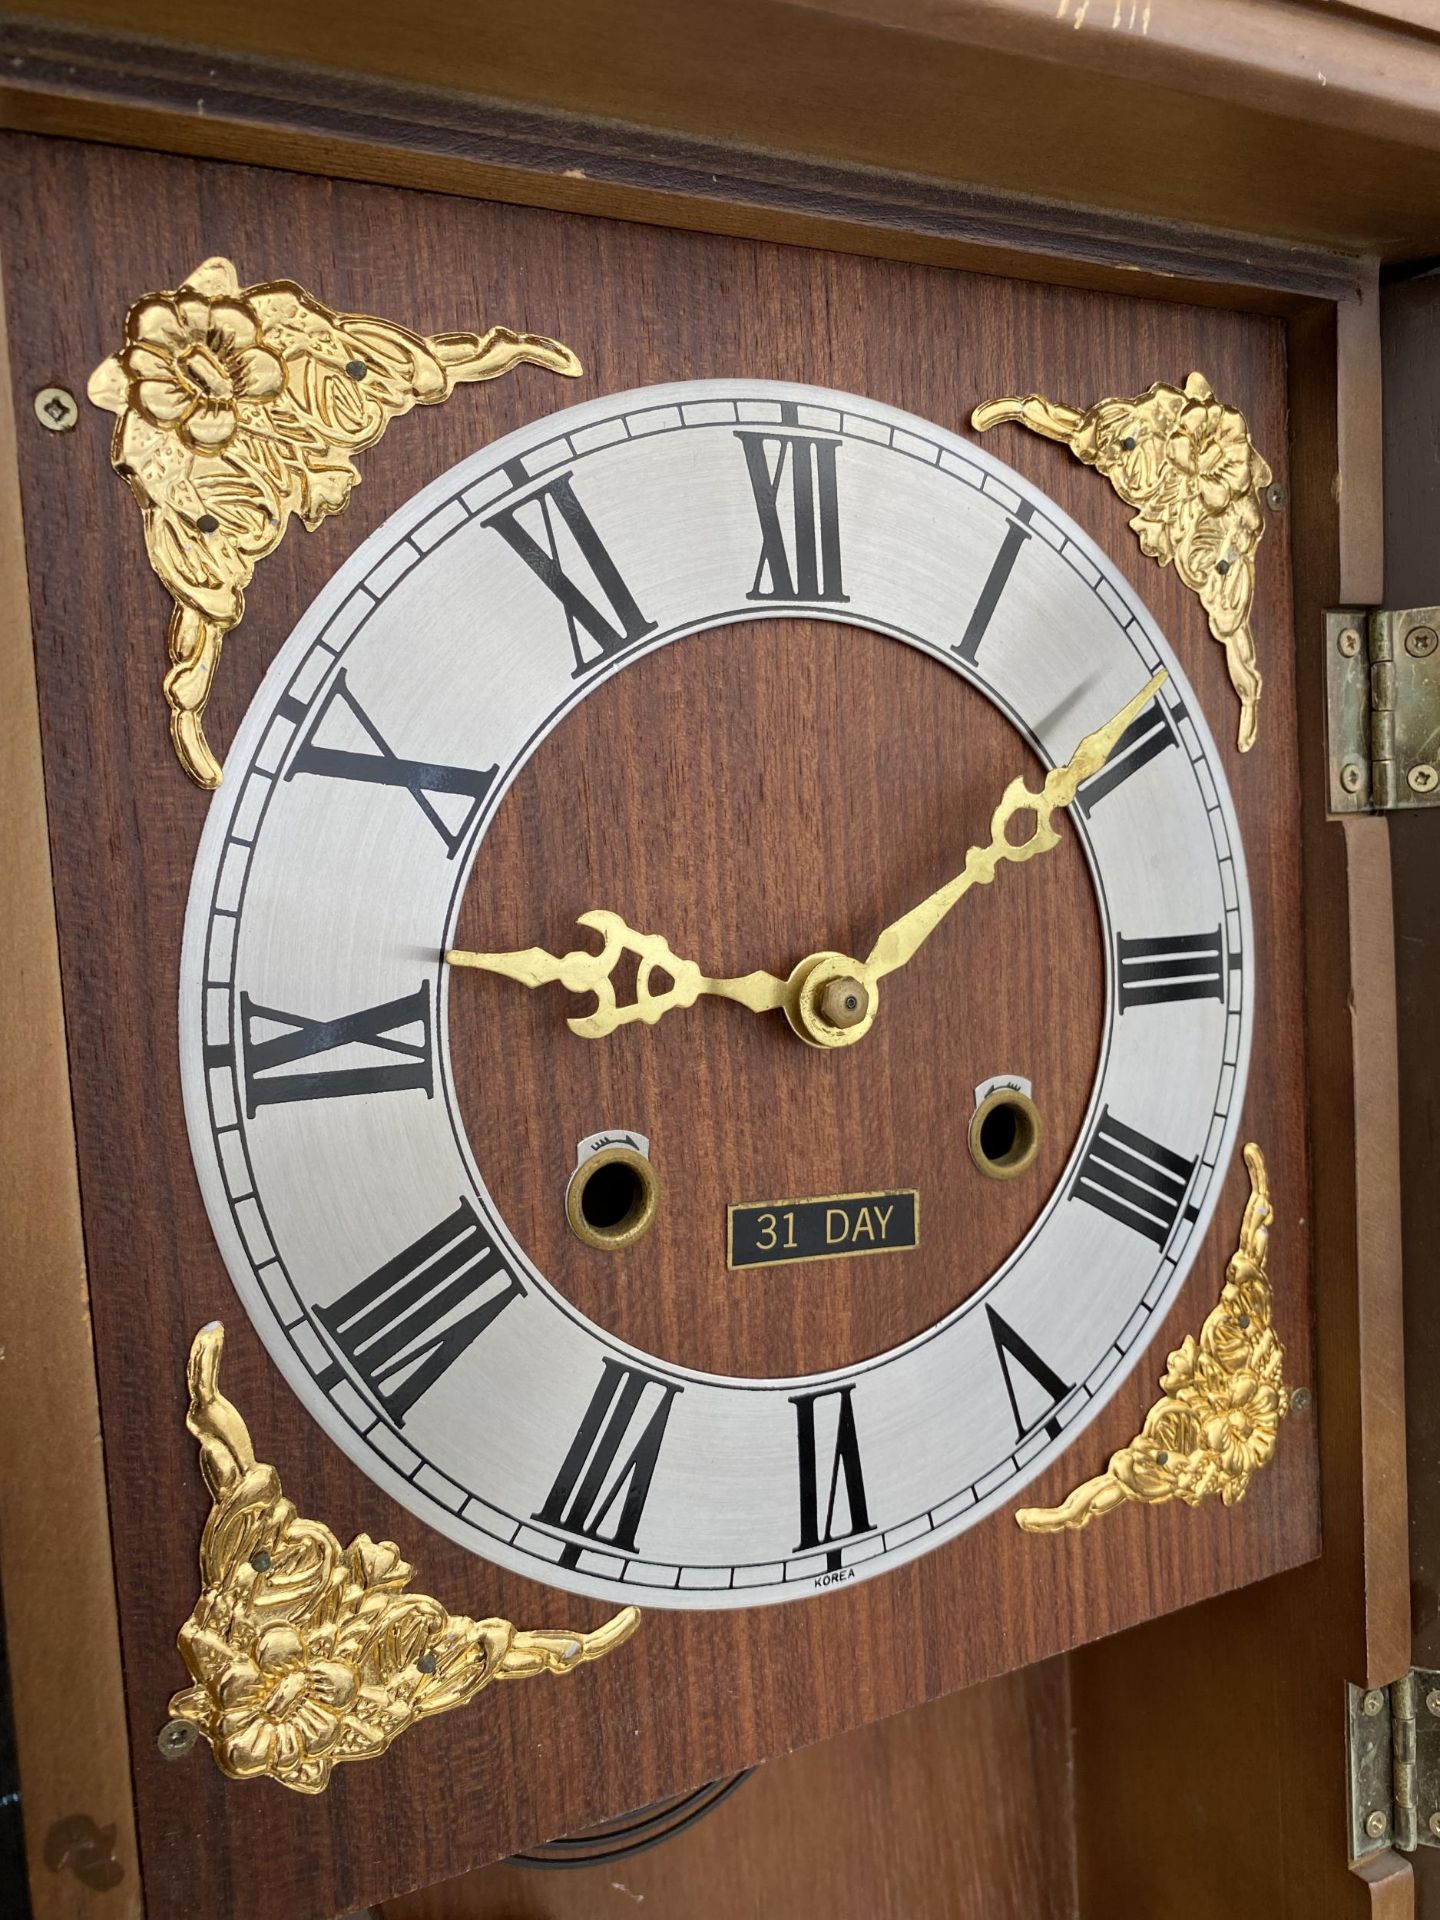 TWO ITEMS - A VINTAGE FLORAL BARBOLA MIRROR AND A MODERN 31 DAY CLOCK - Image 3 of 7